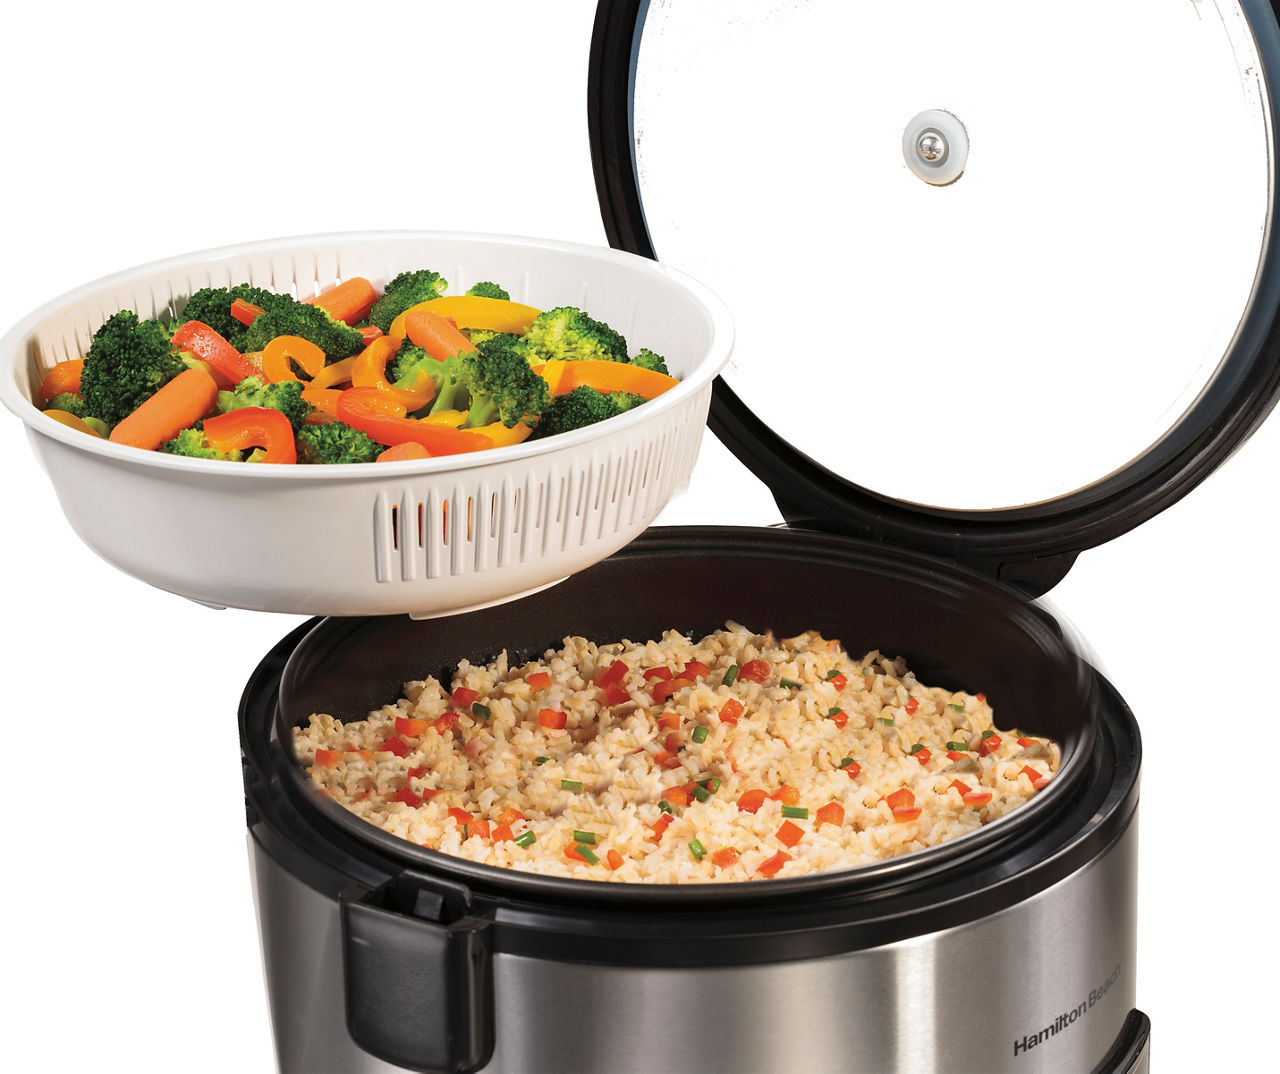 Hamilton Beach 14-Cup Stainless Steel Rice/Hot Cereal Cooker 37548